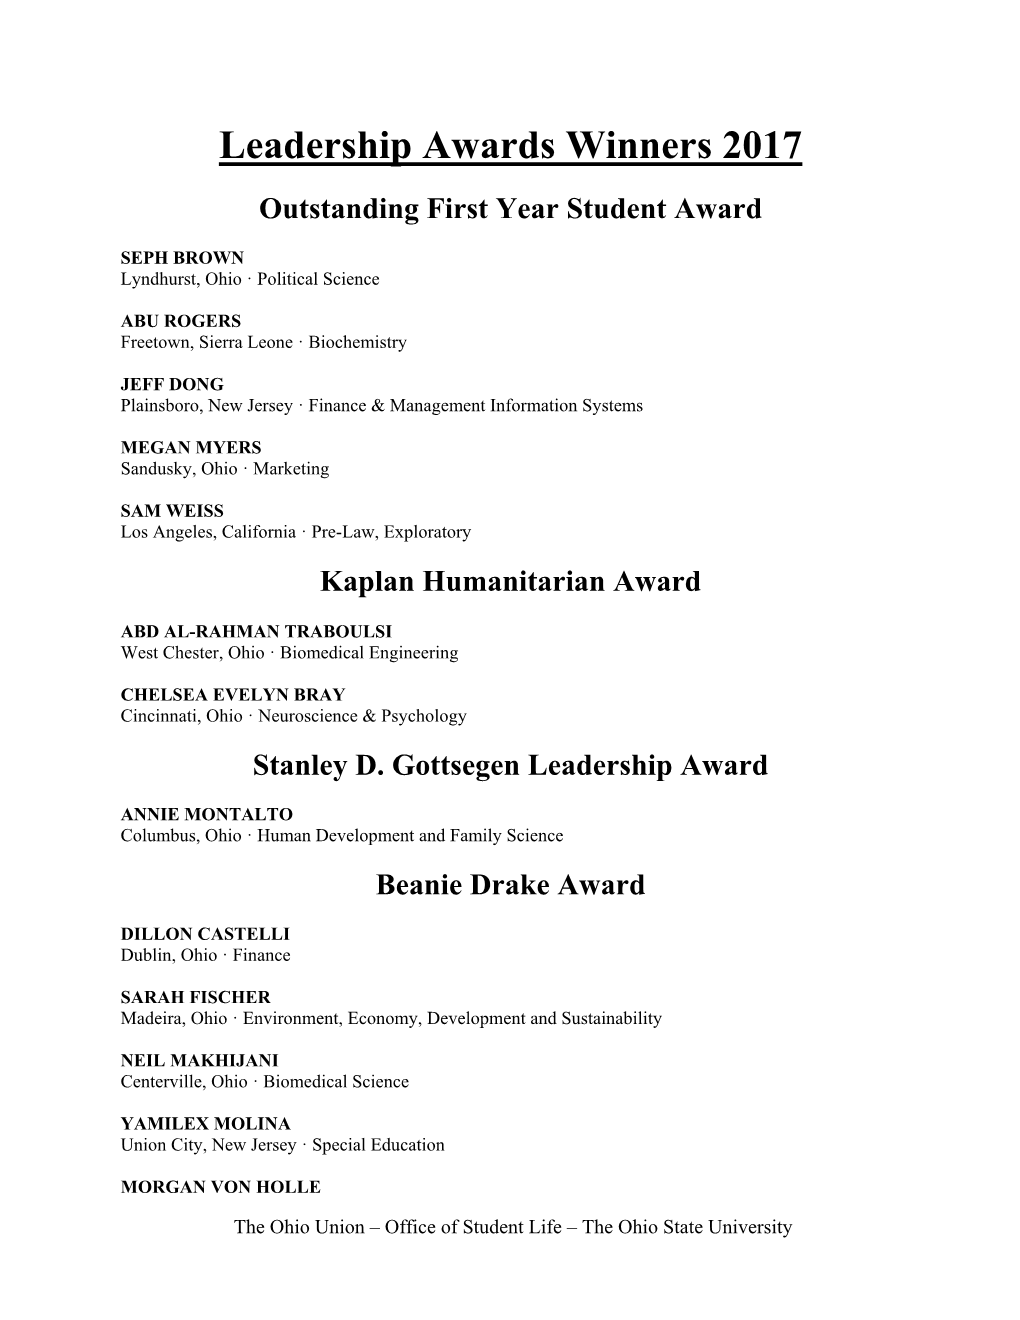 Congratulations to the 46Th Annual Leadership Award Recipients (May